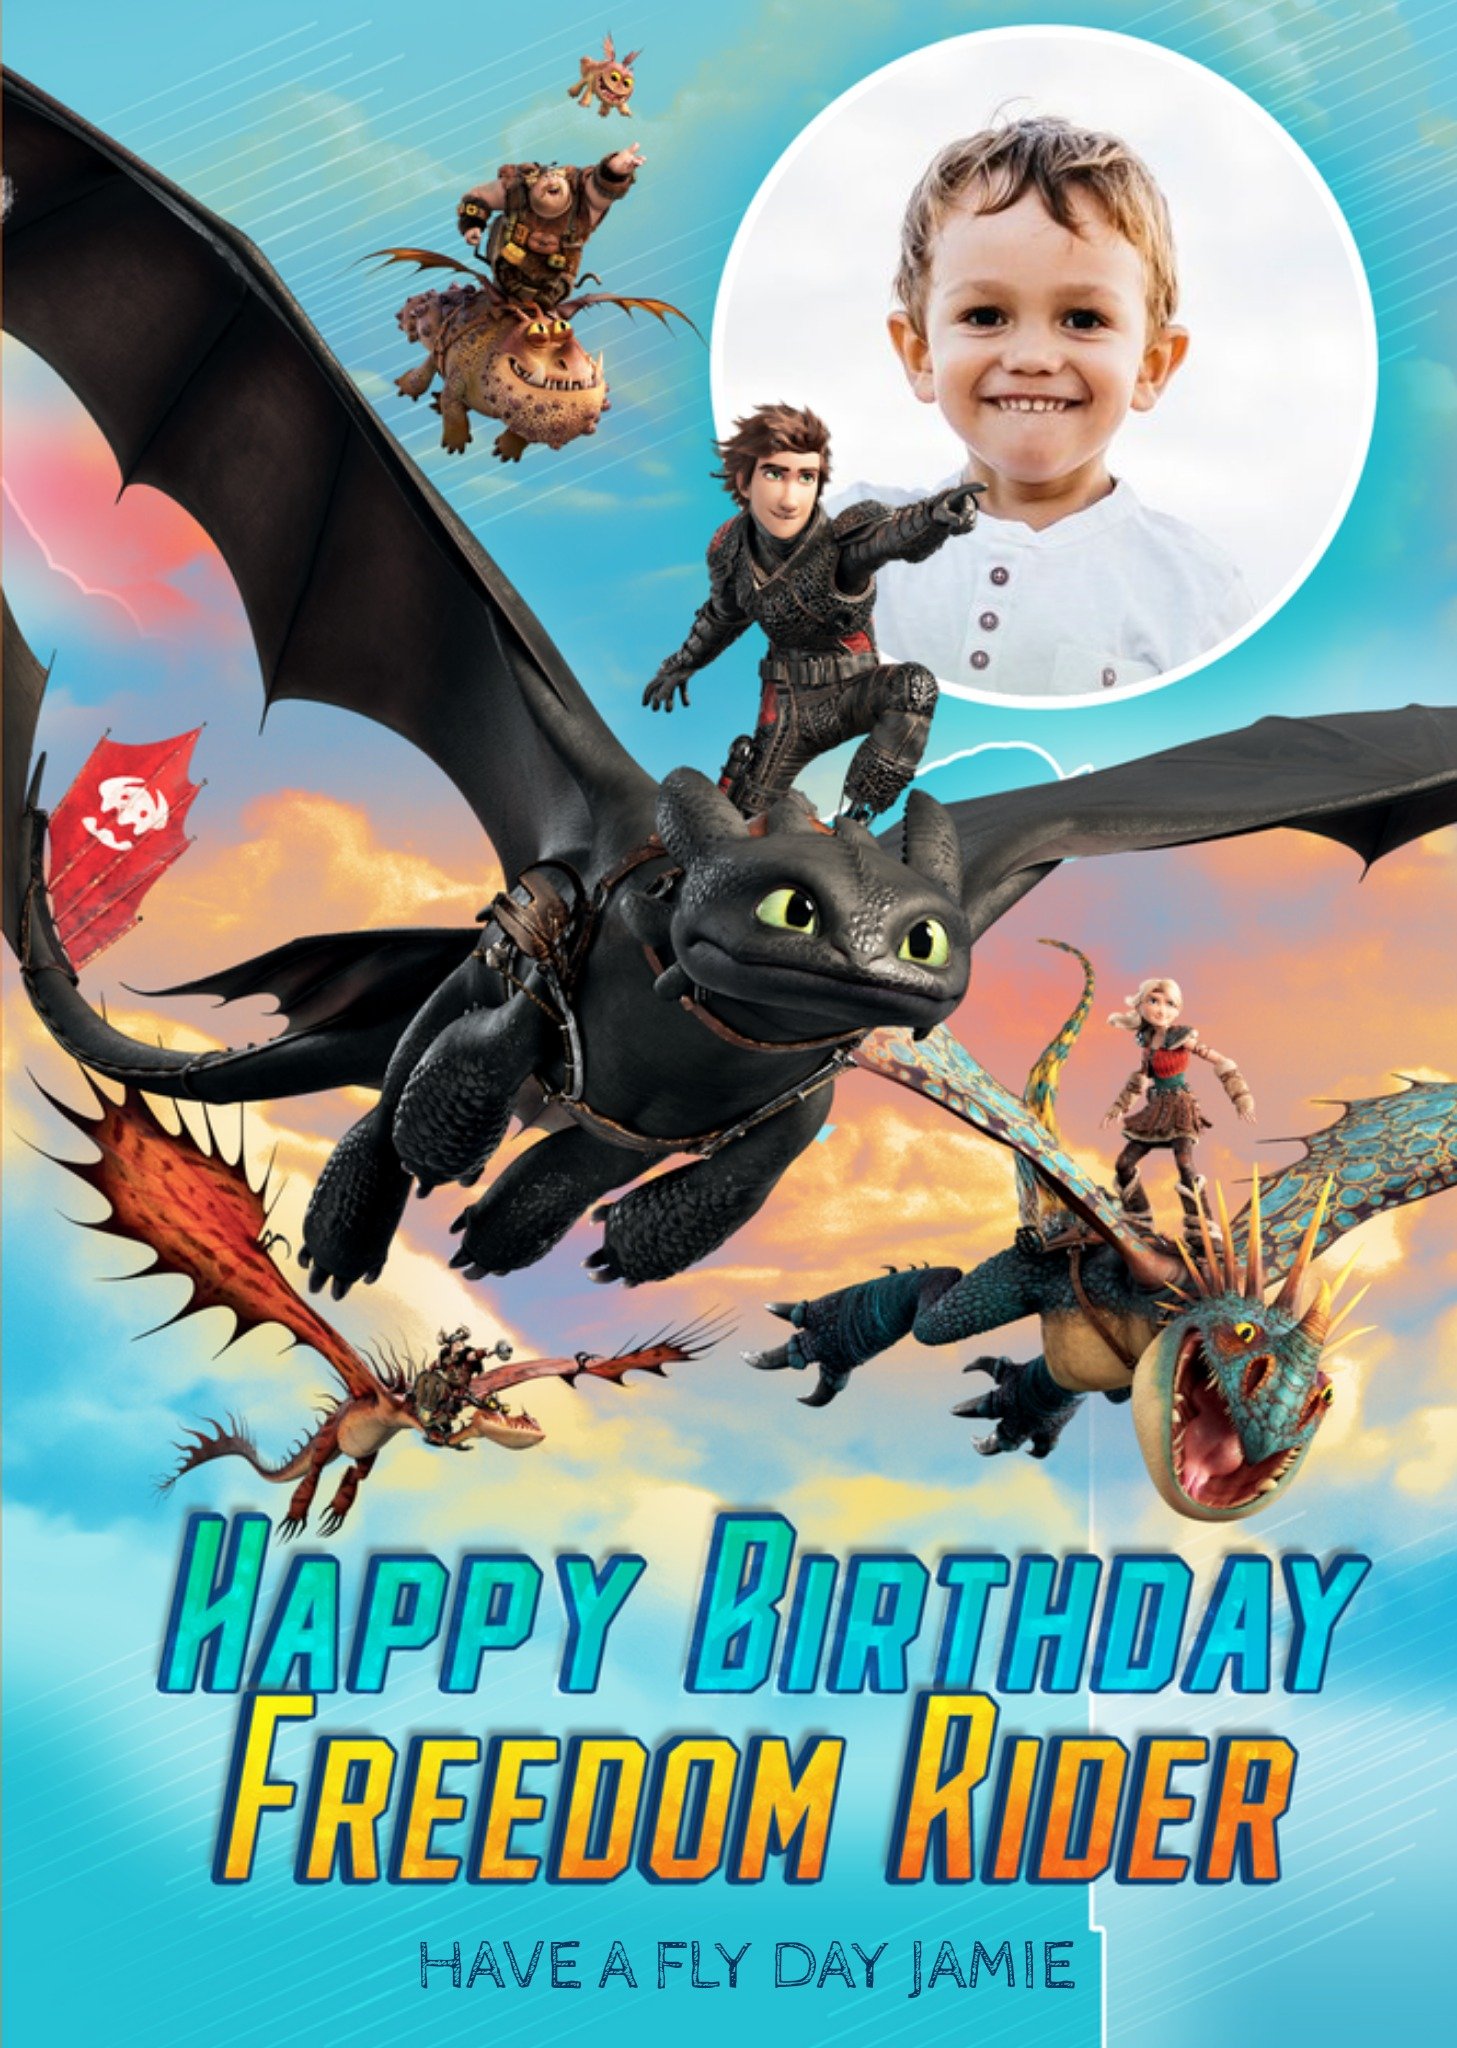 Other Freedom Rider - How To Train Your Dragon Birthday Card, Large